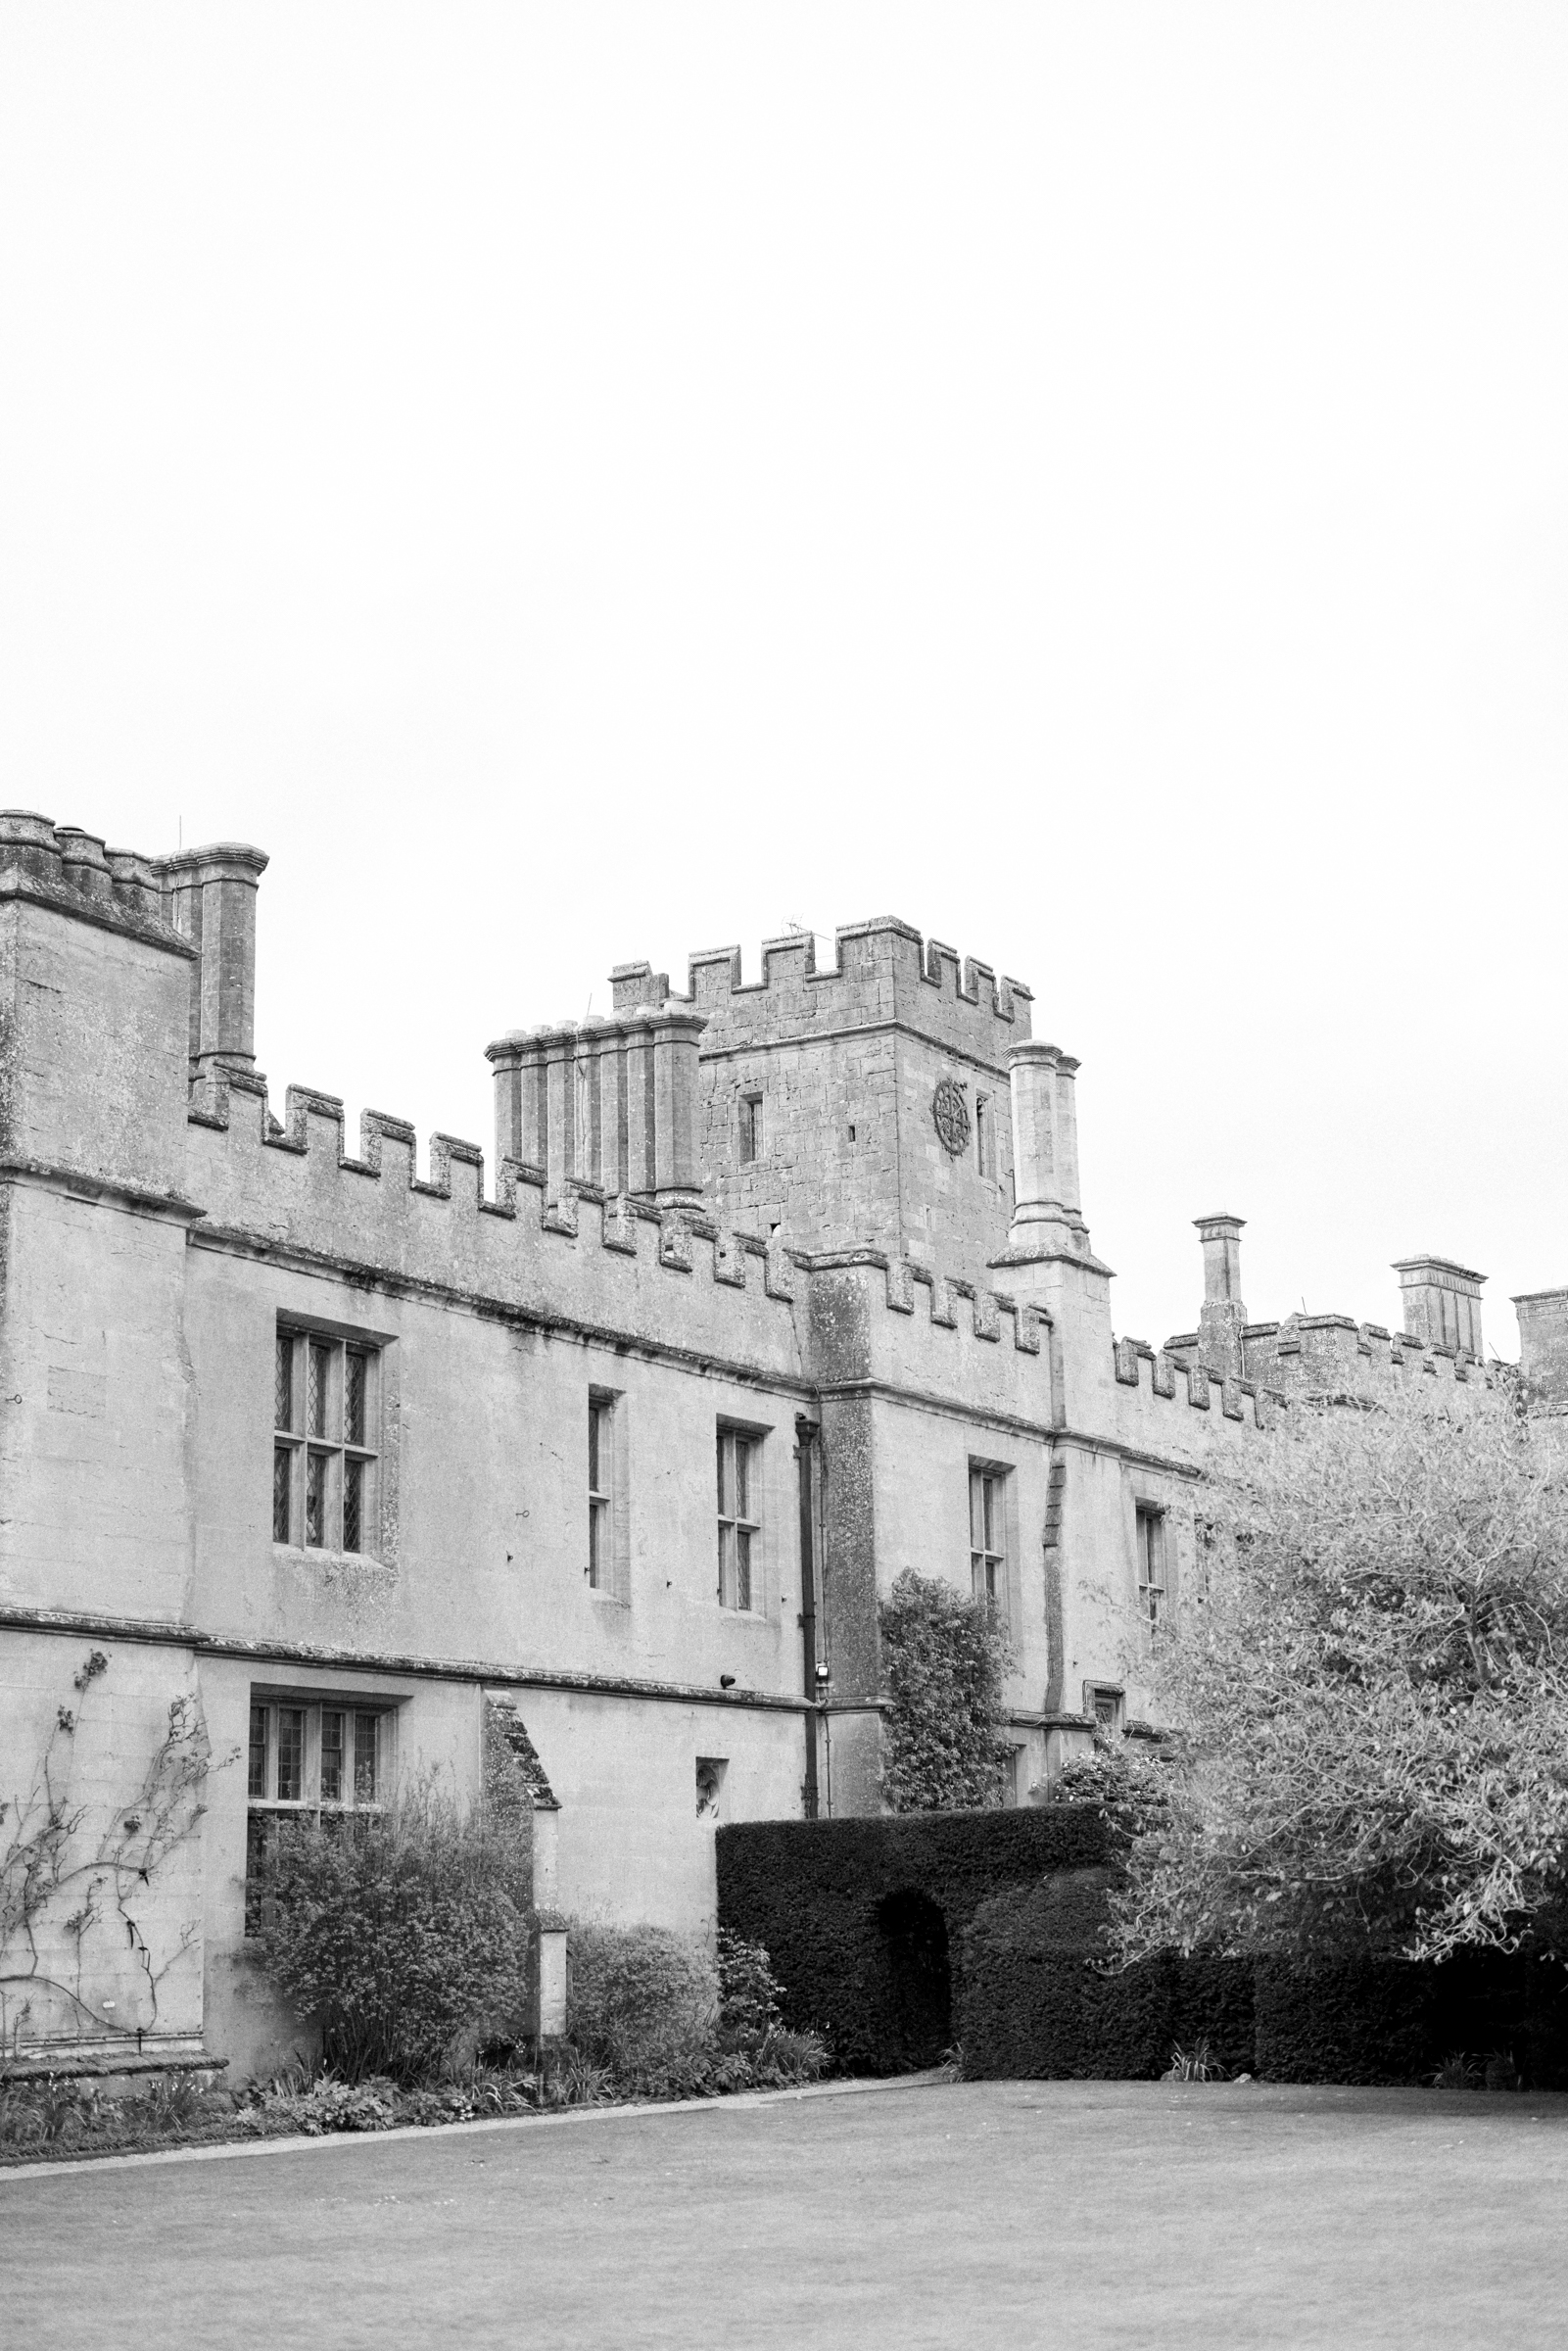 Sudeley Castle wedding venue in the Cotswolds